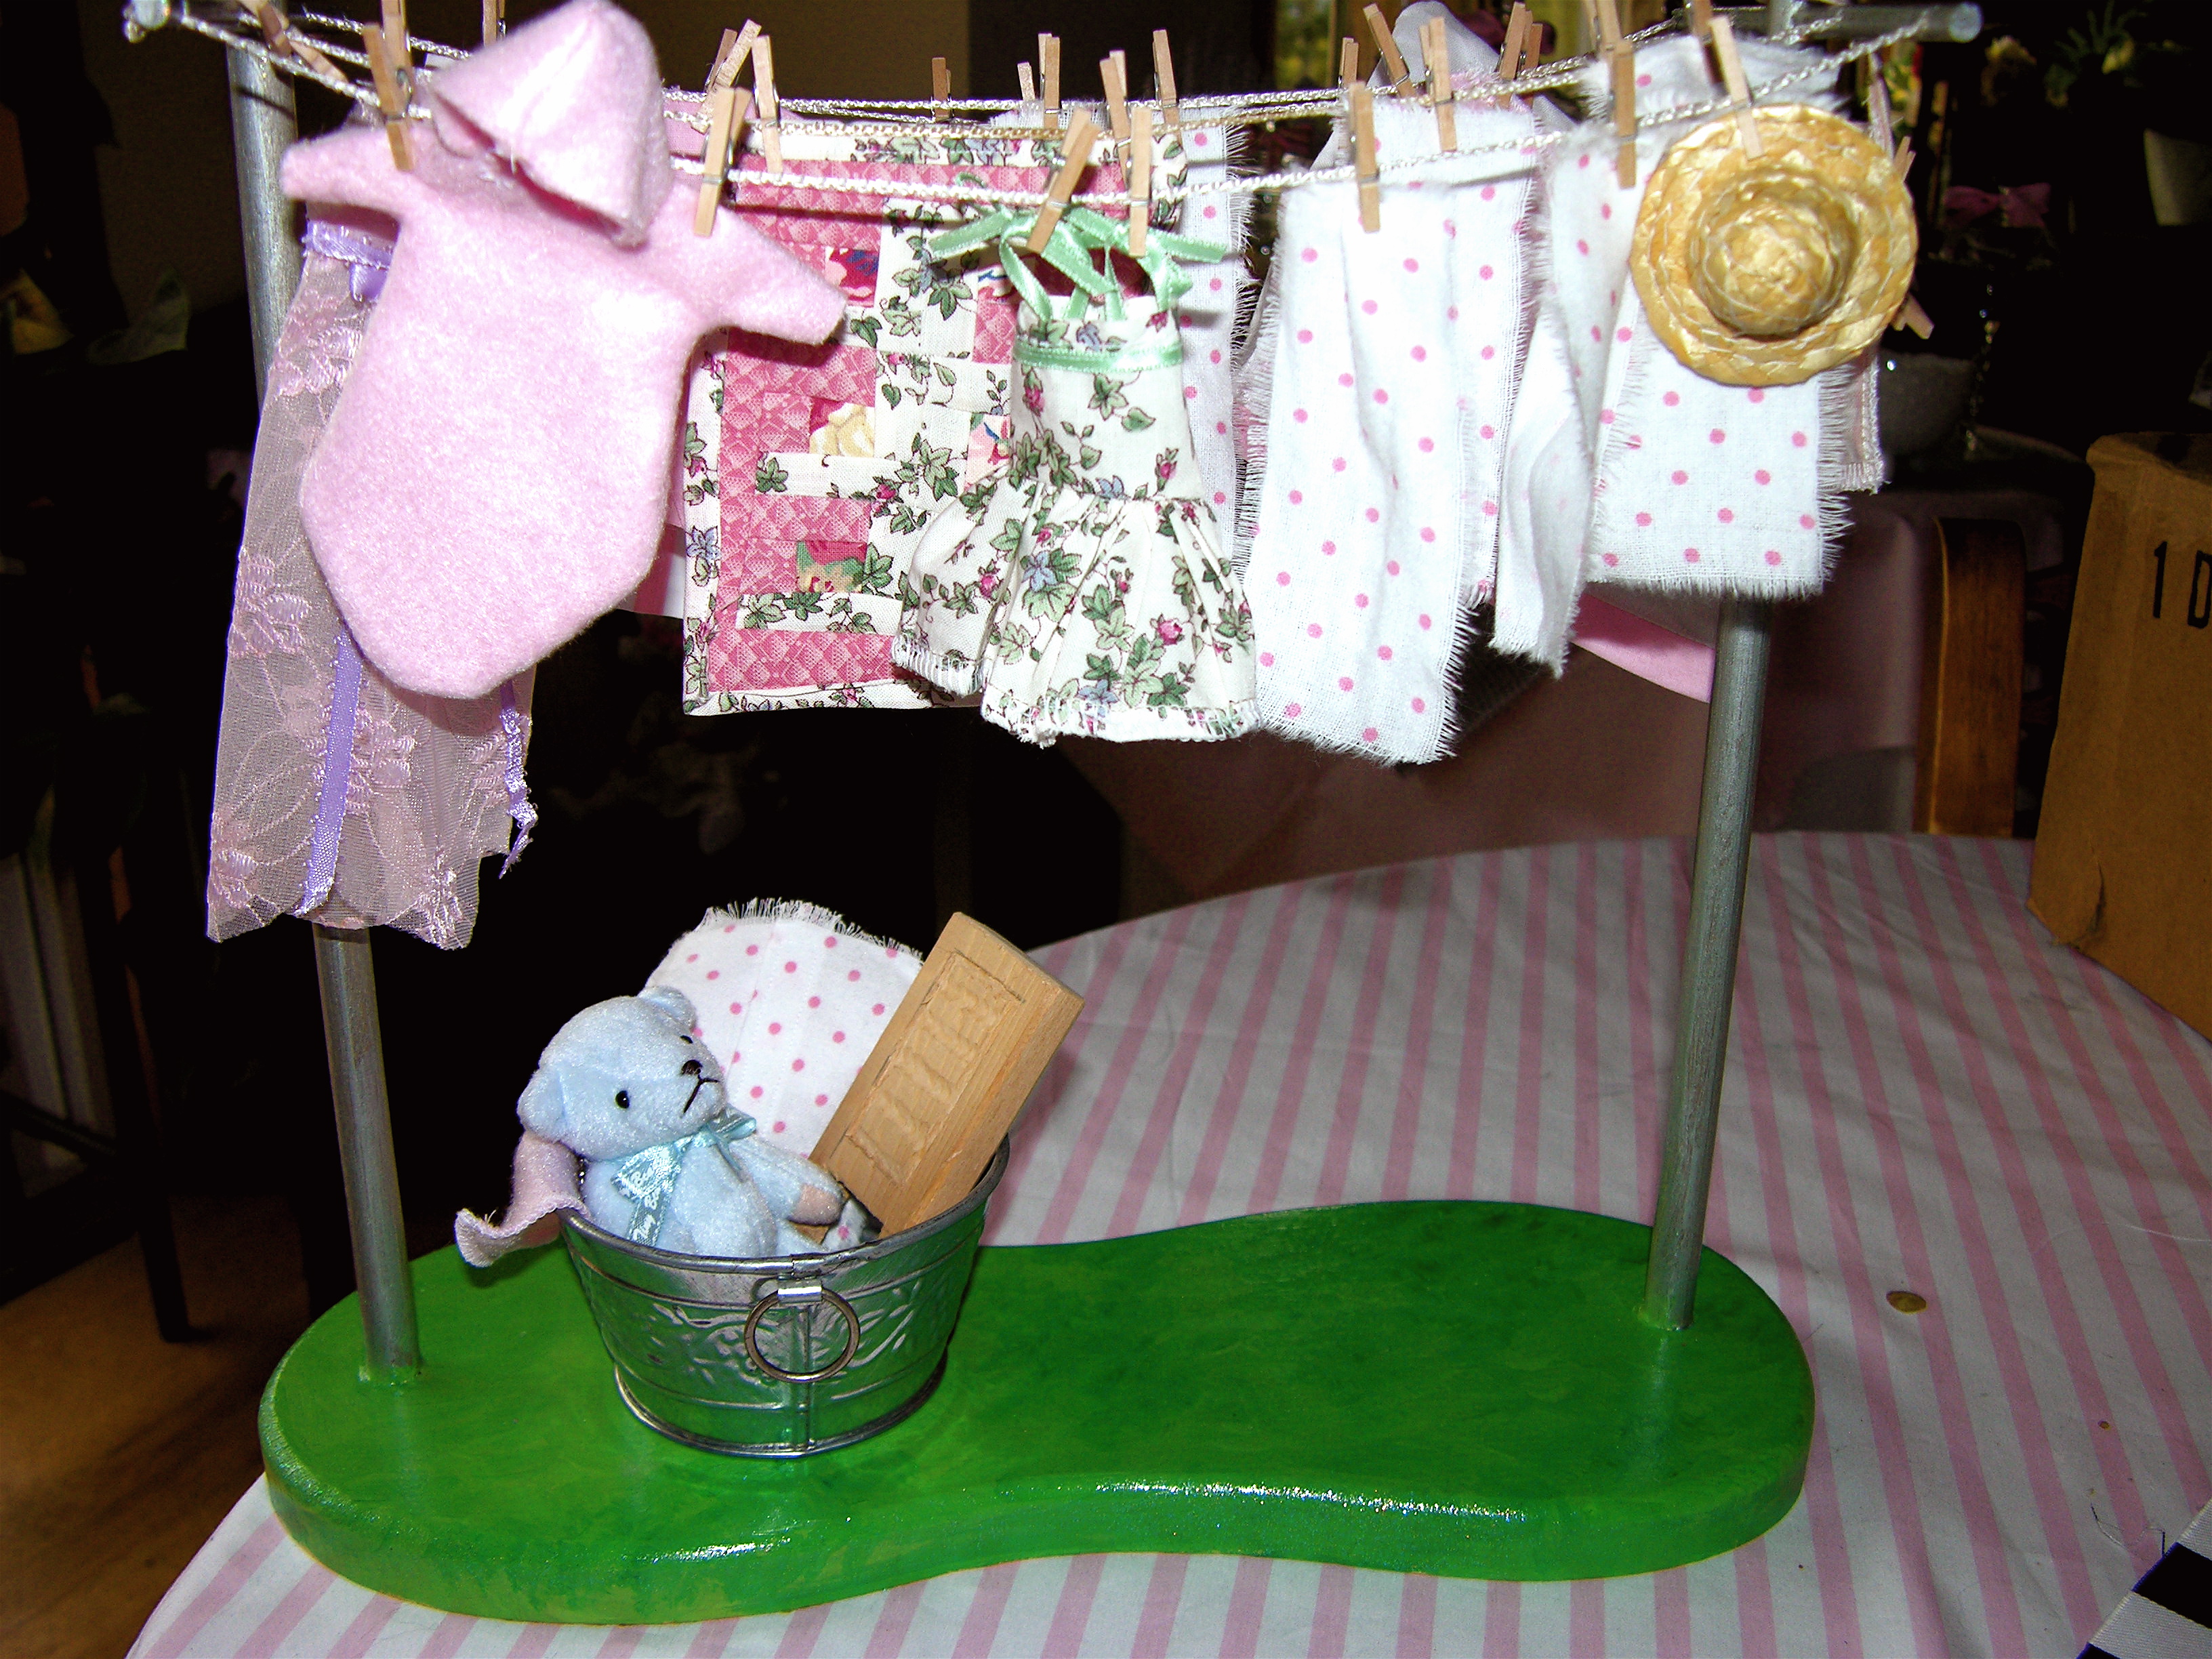 centerpiece for the baby shower | Flickr - Photo Sharing!